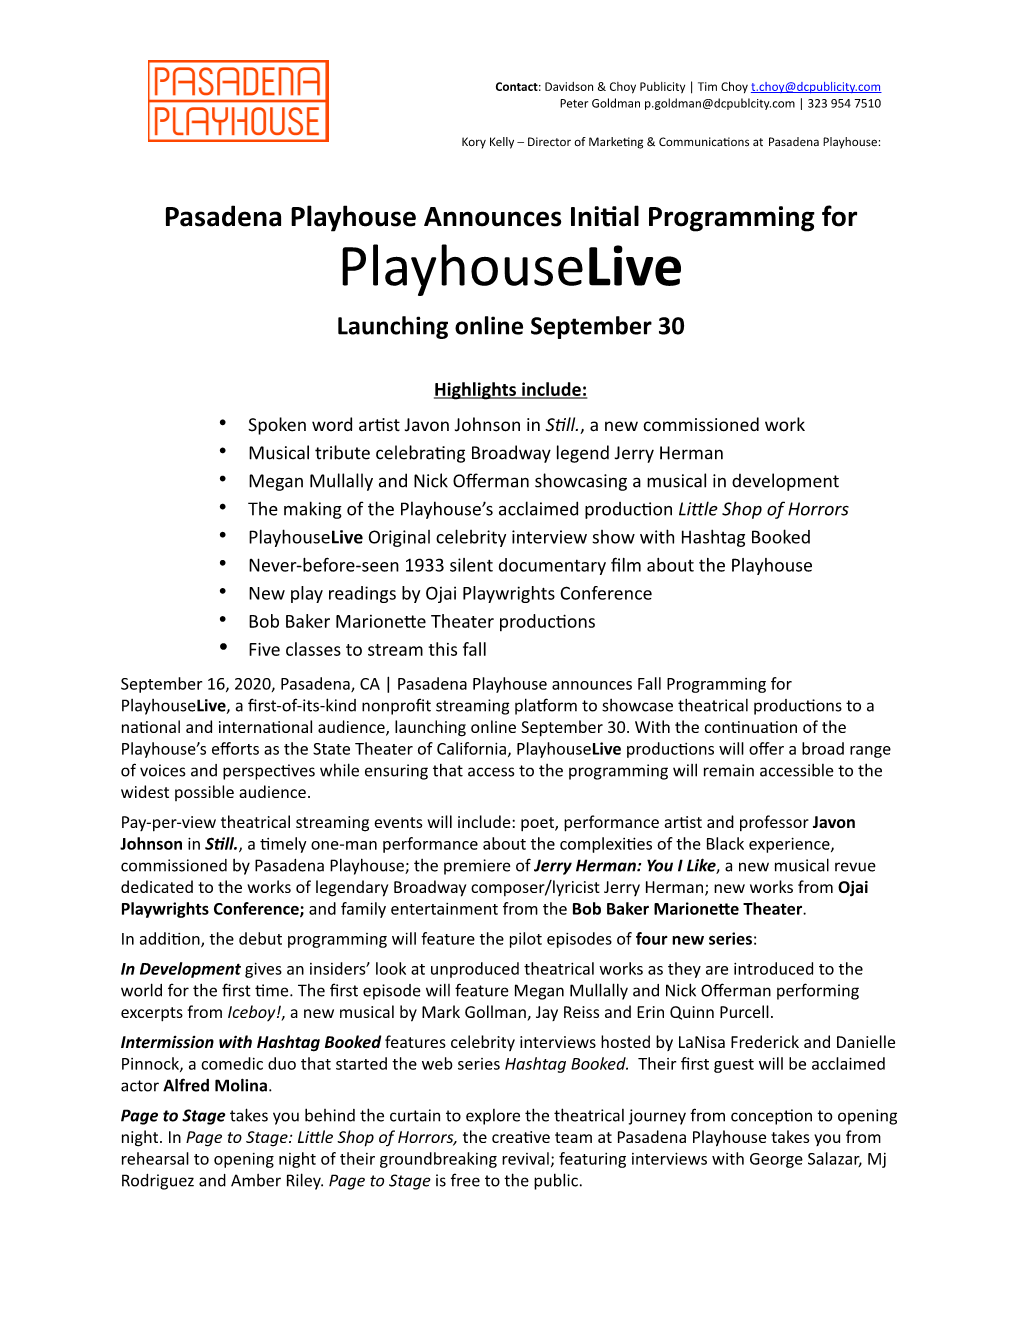 Playhouselive Programming Announcement